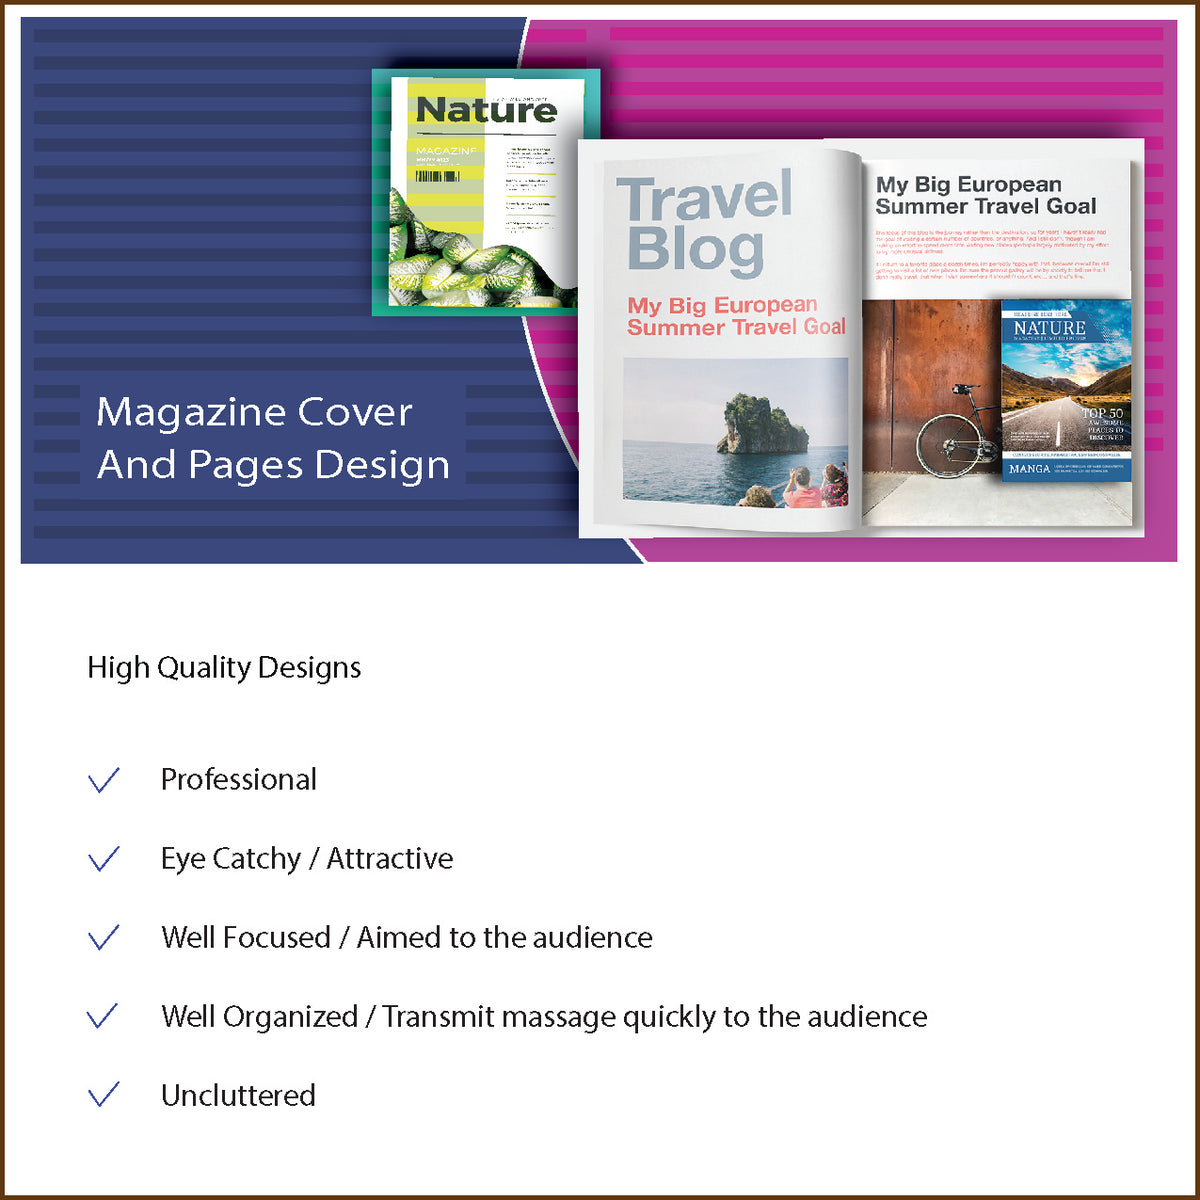 Magazine Cover and pages Design